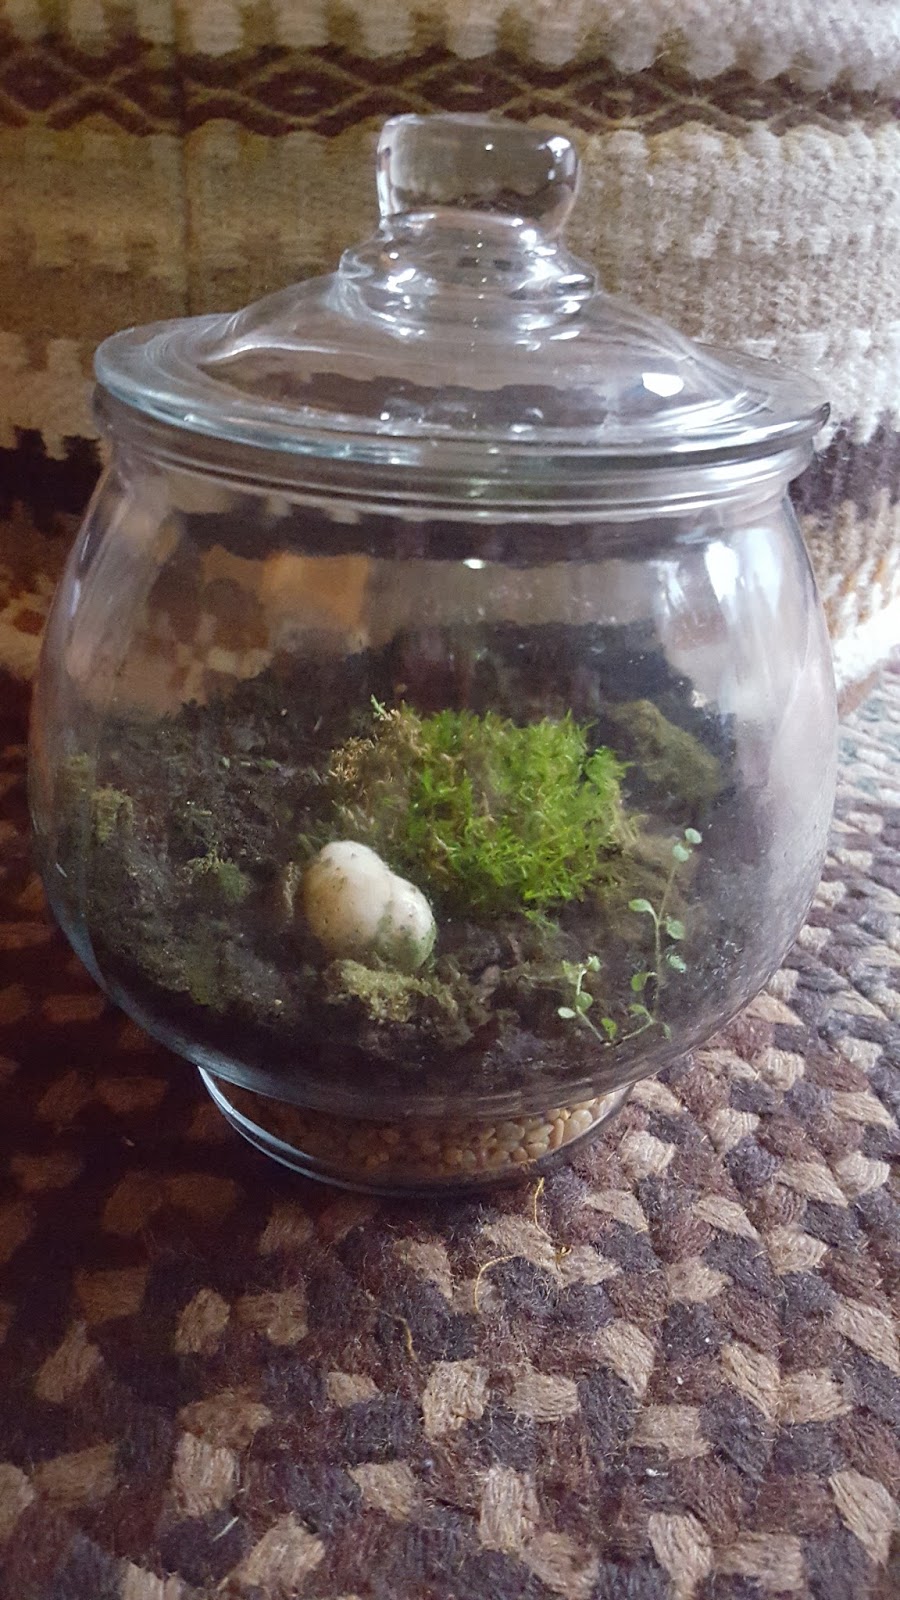 Divers and Sundry: My Terrarium Project